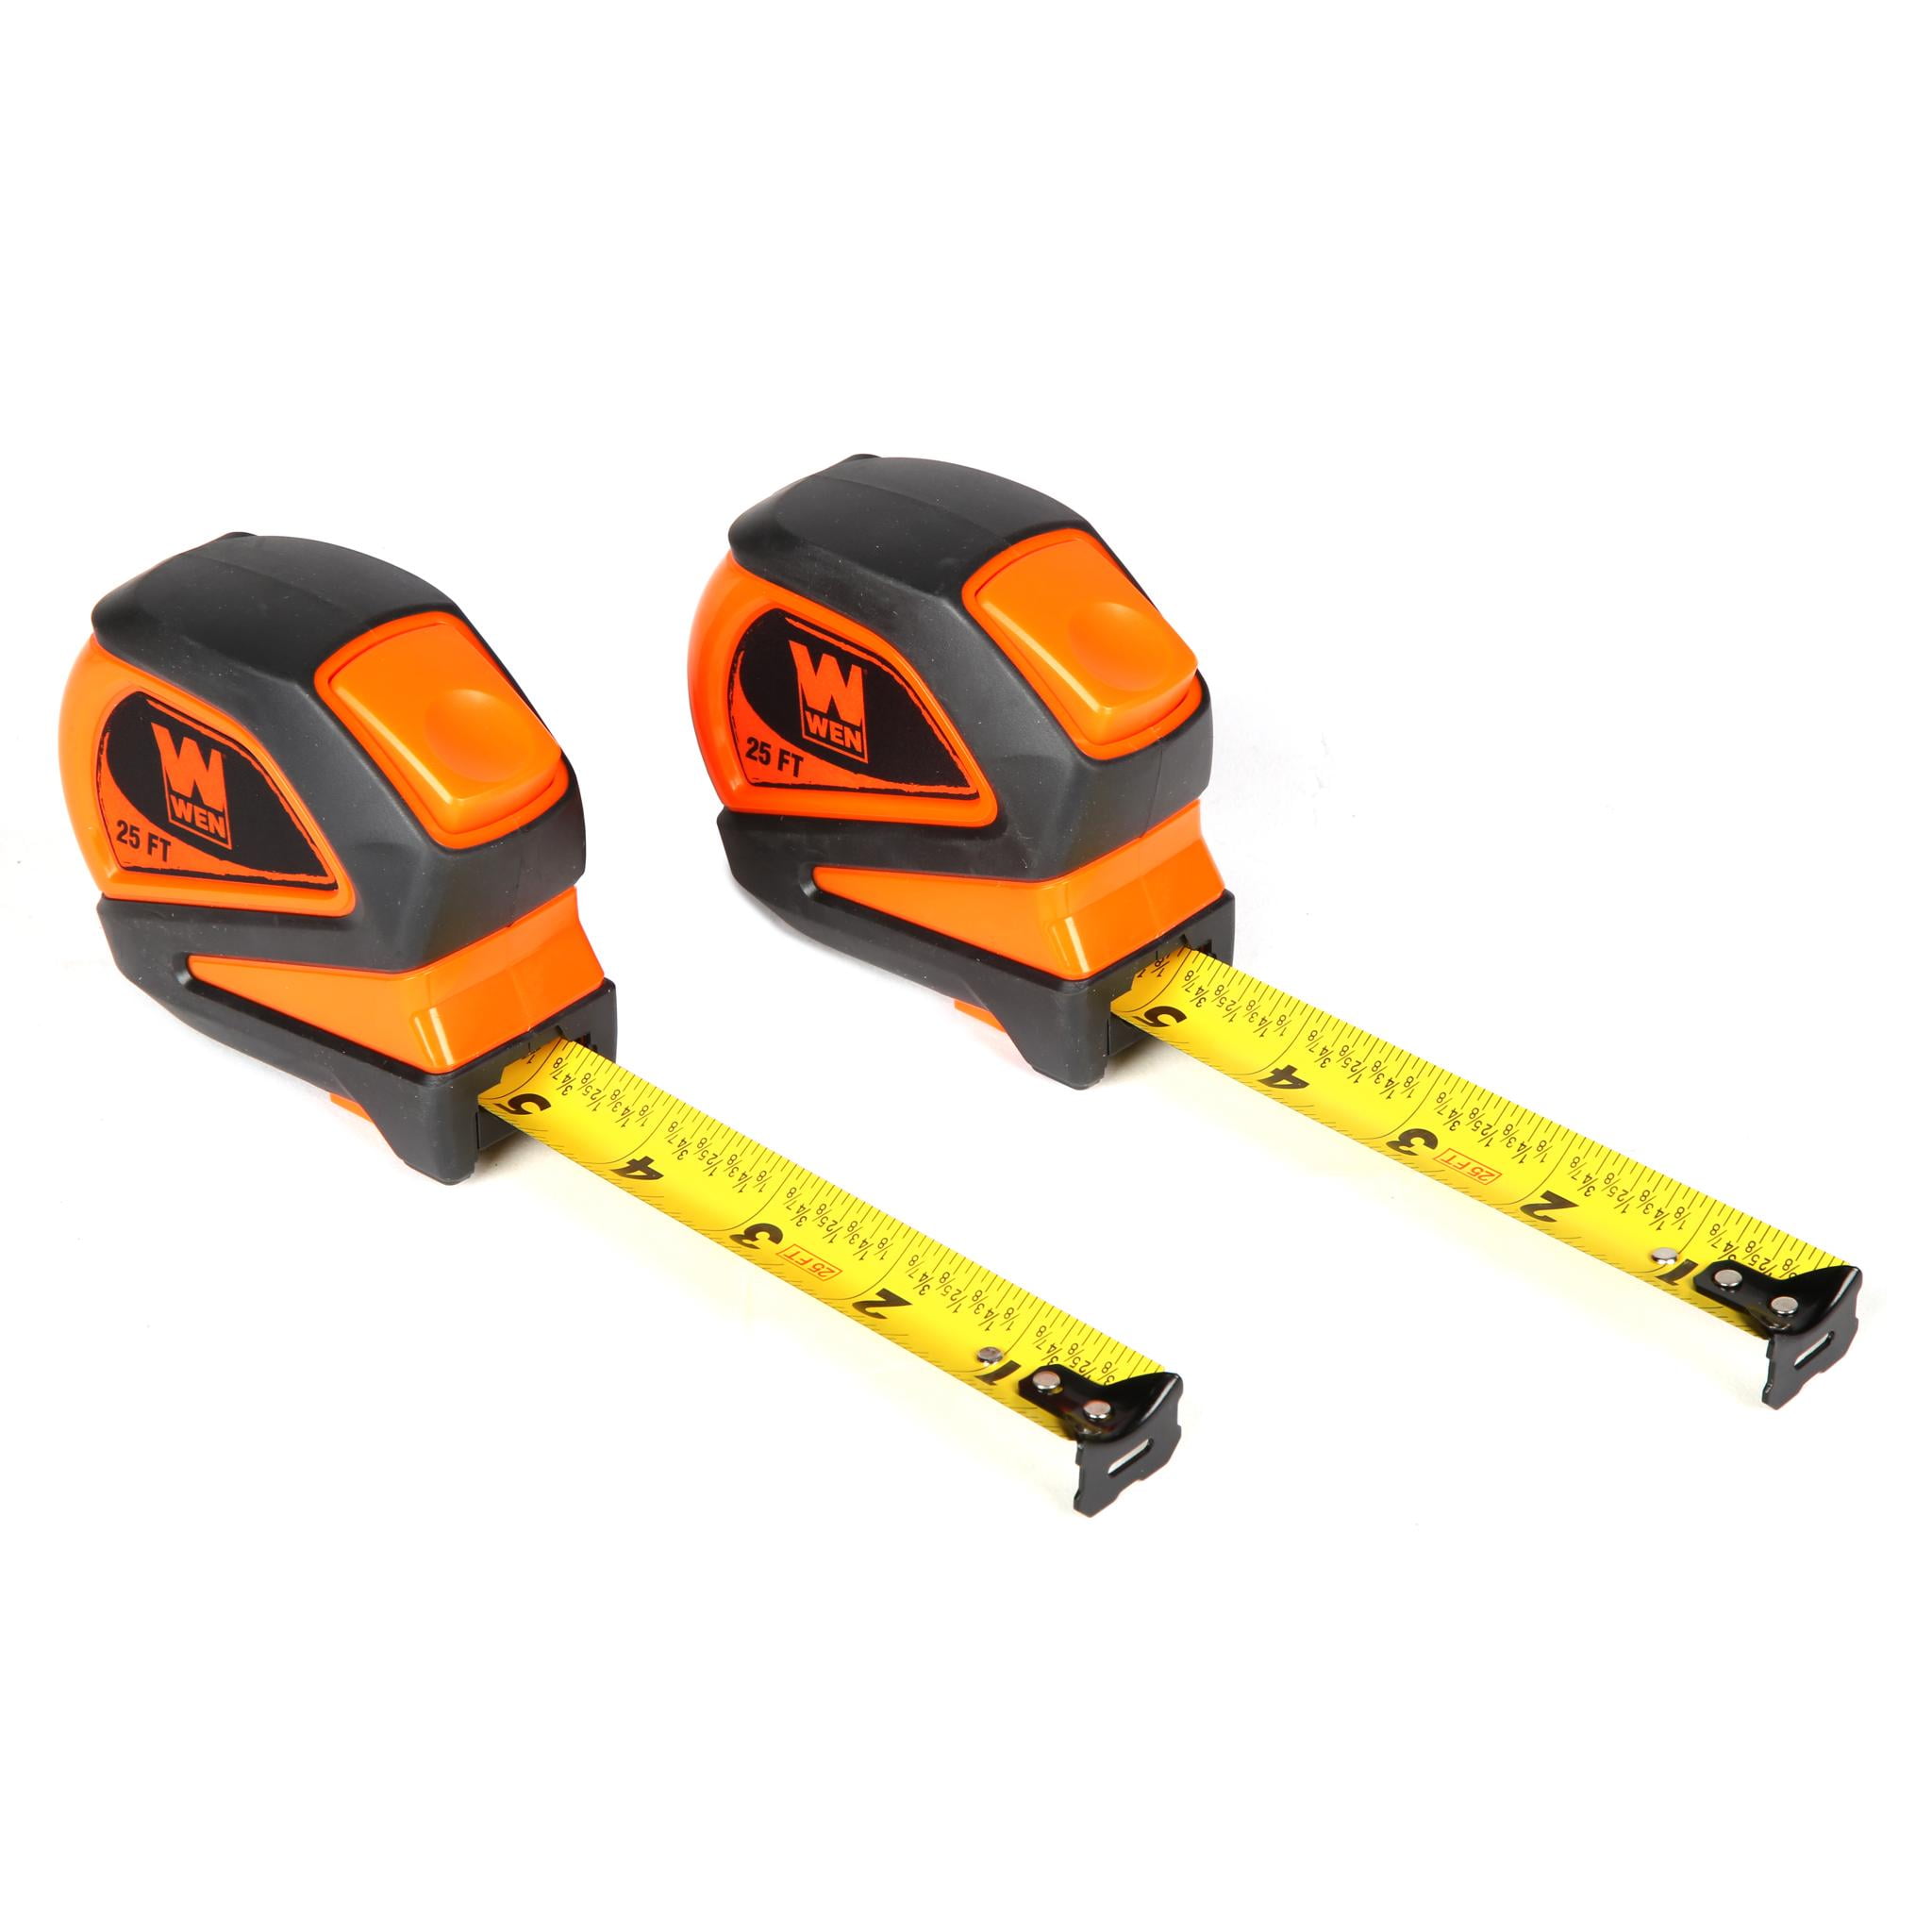 CRAFTSMAN PRO-11 25-ft Auto Lock Tape Measure in the Tape Measures